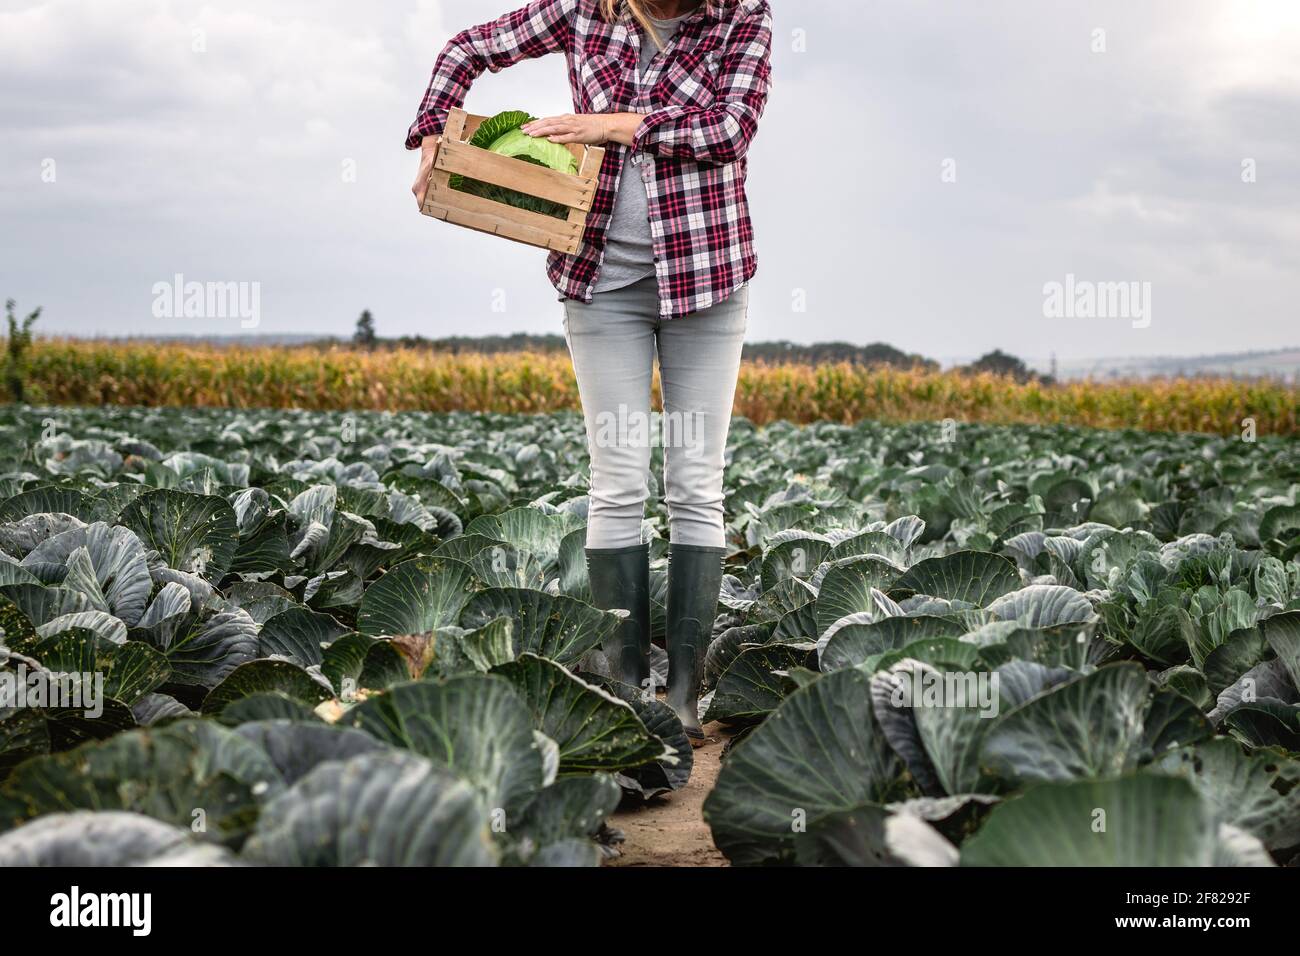 Farmer harvesting cabbage vegetable at field. Woman with straw hat is holding wooden crate. Gardening and agricultural activity during harvest season Stock Photo